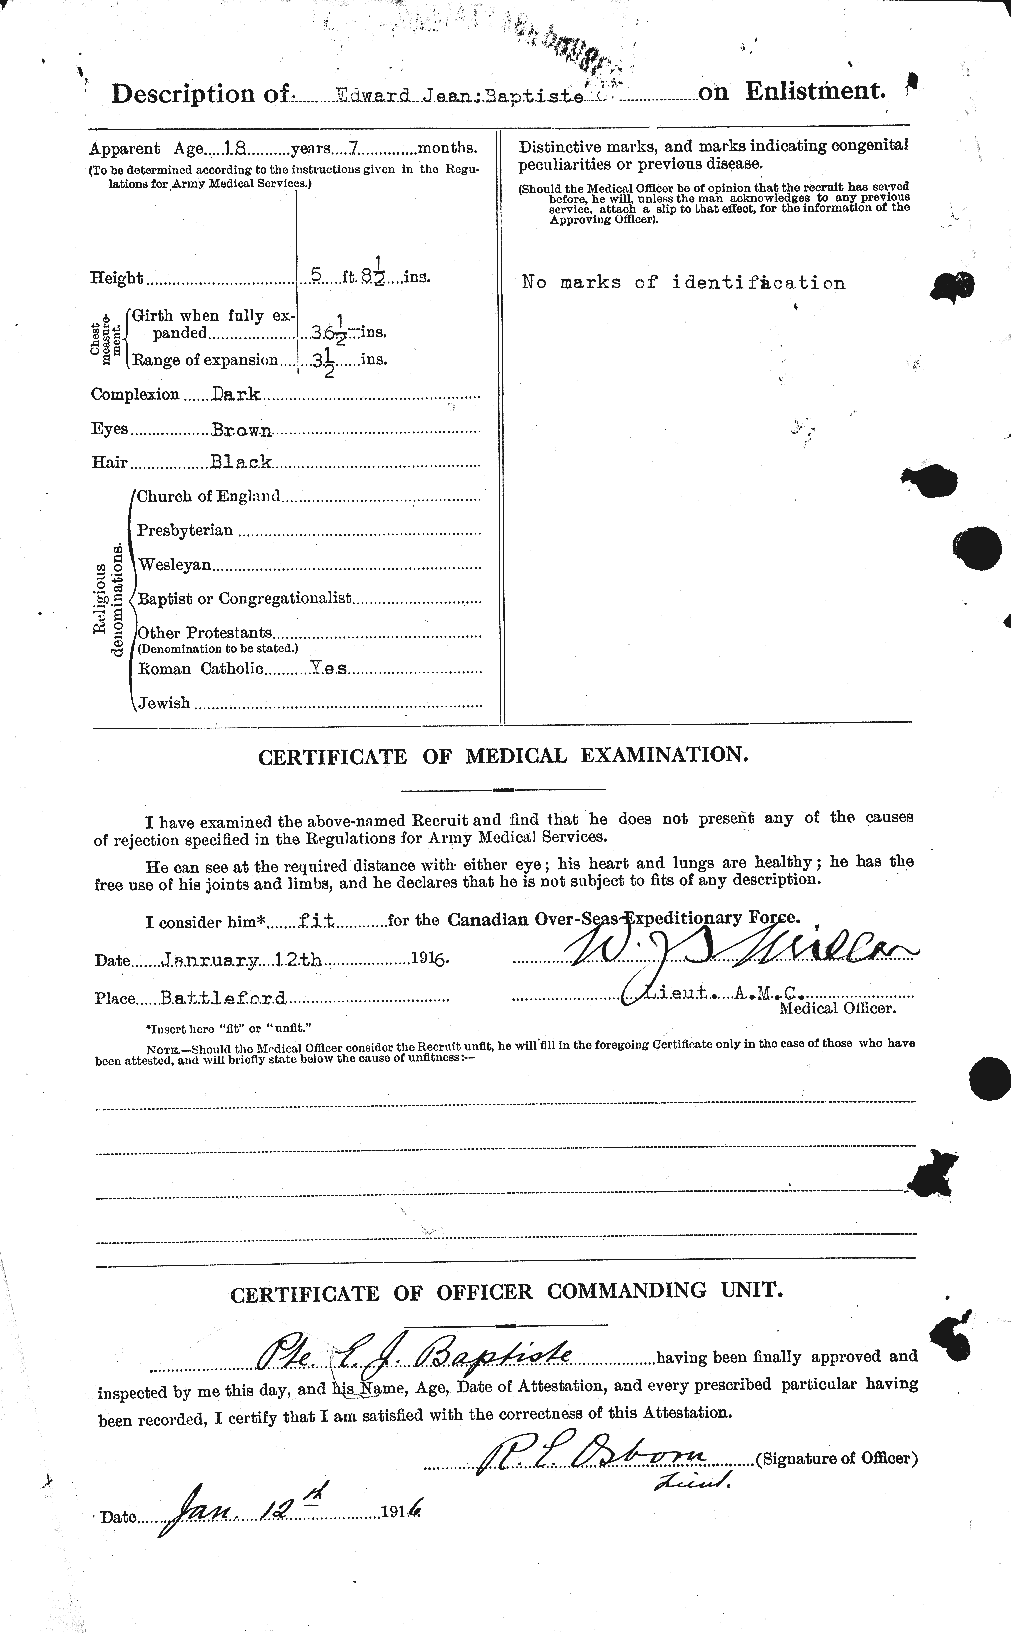 Personnel Records of the First World War - CEF 220537b